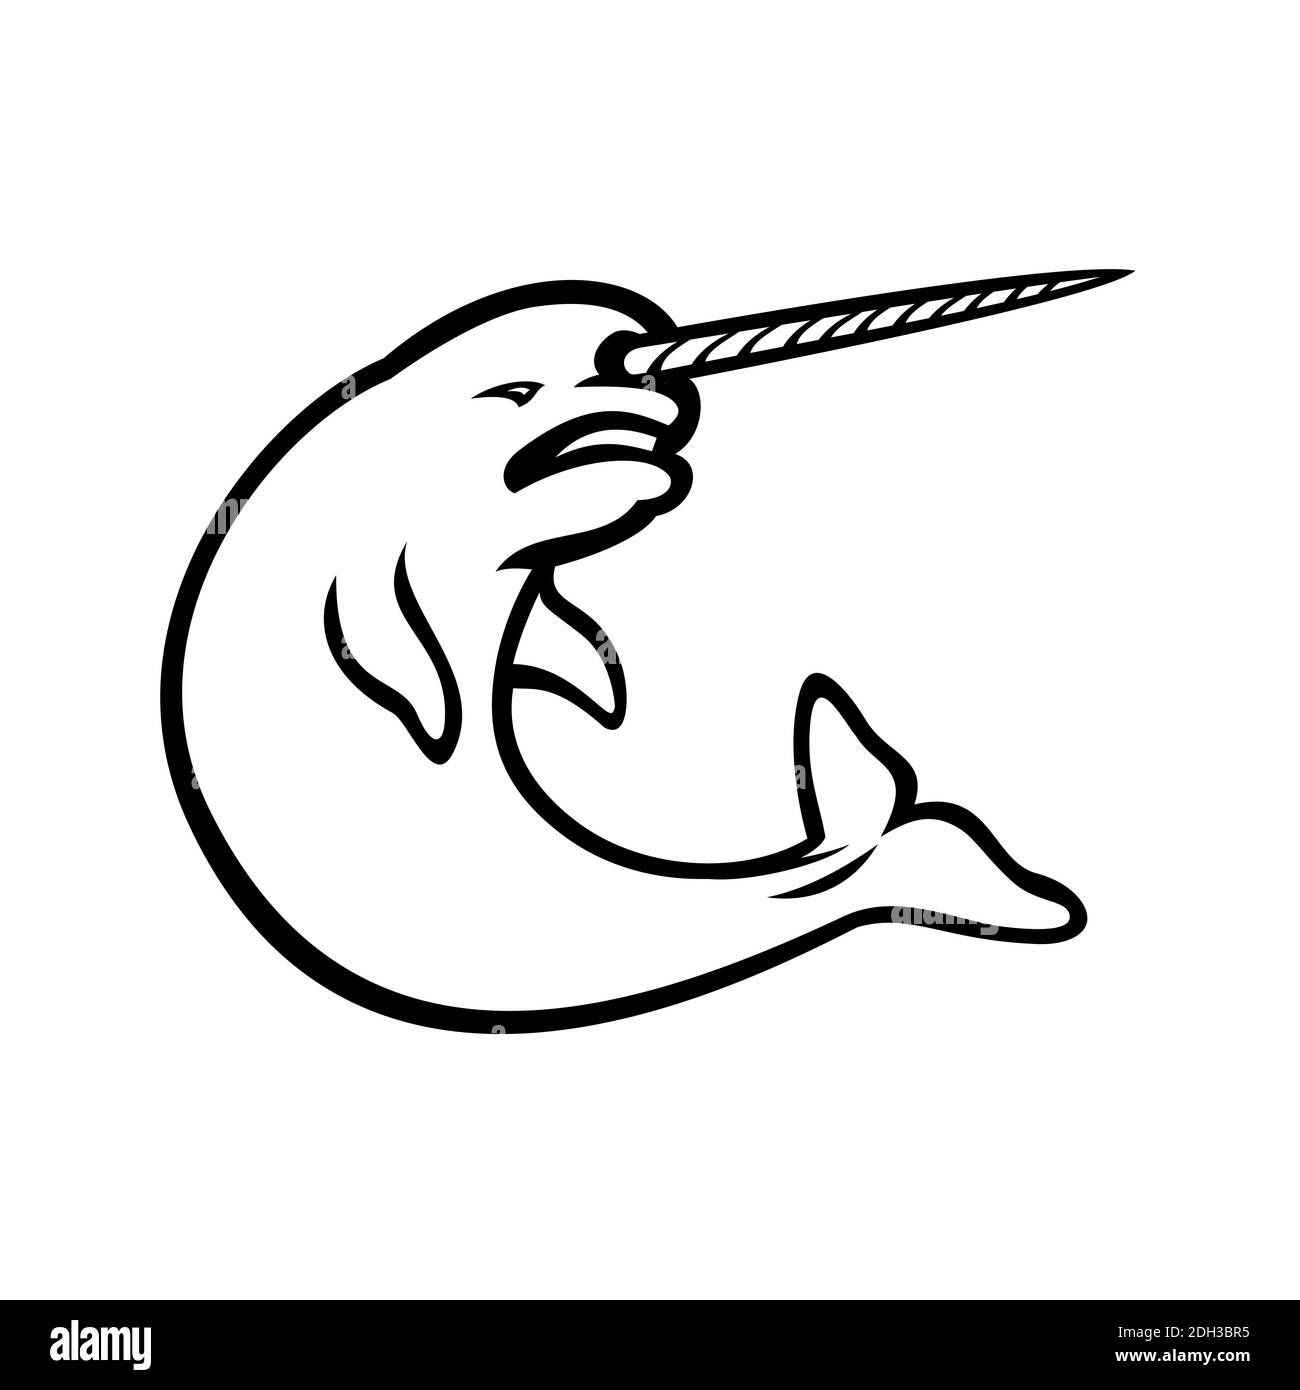 narwhal line drawing